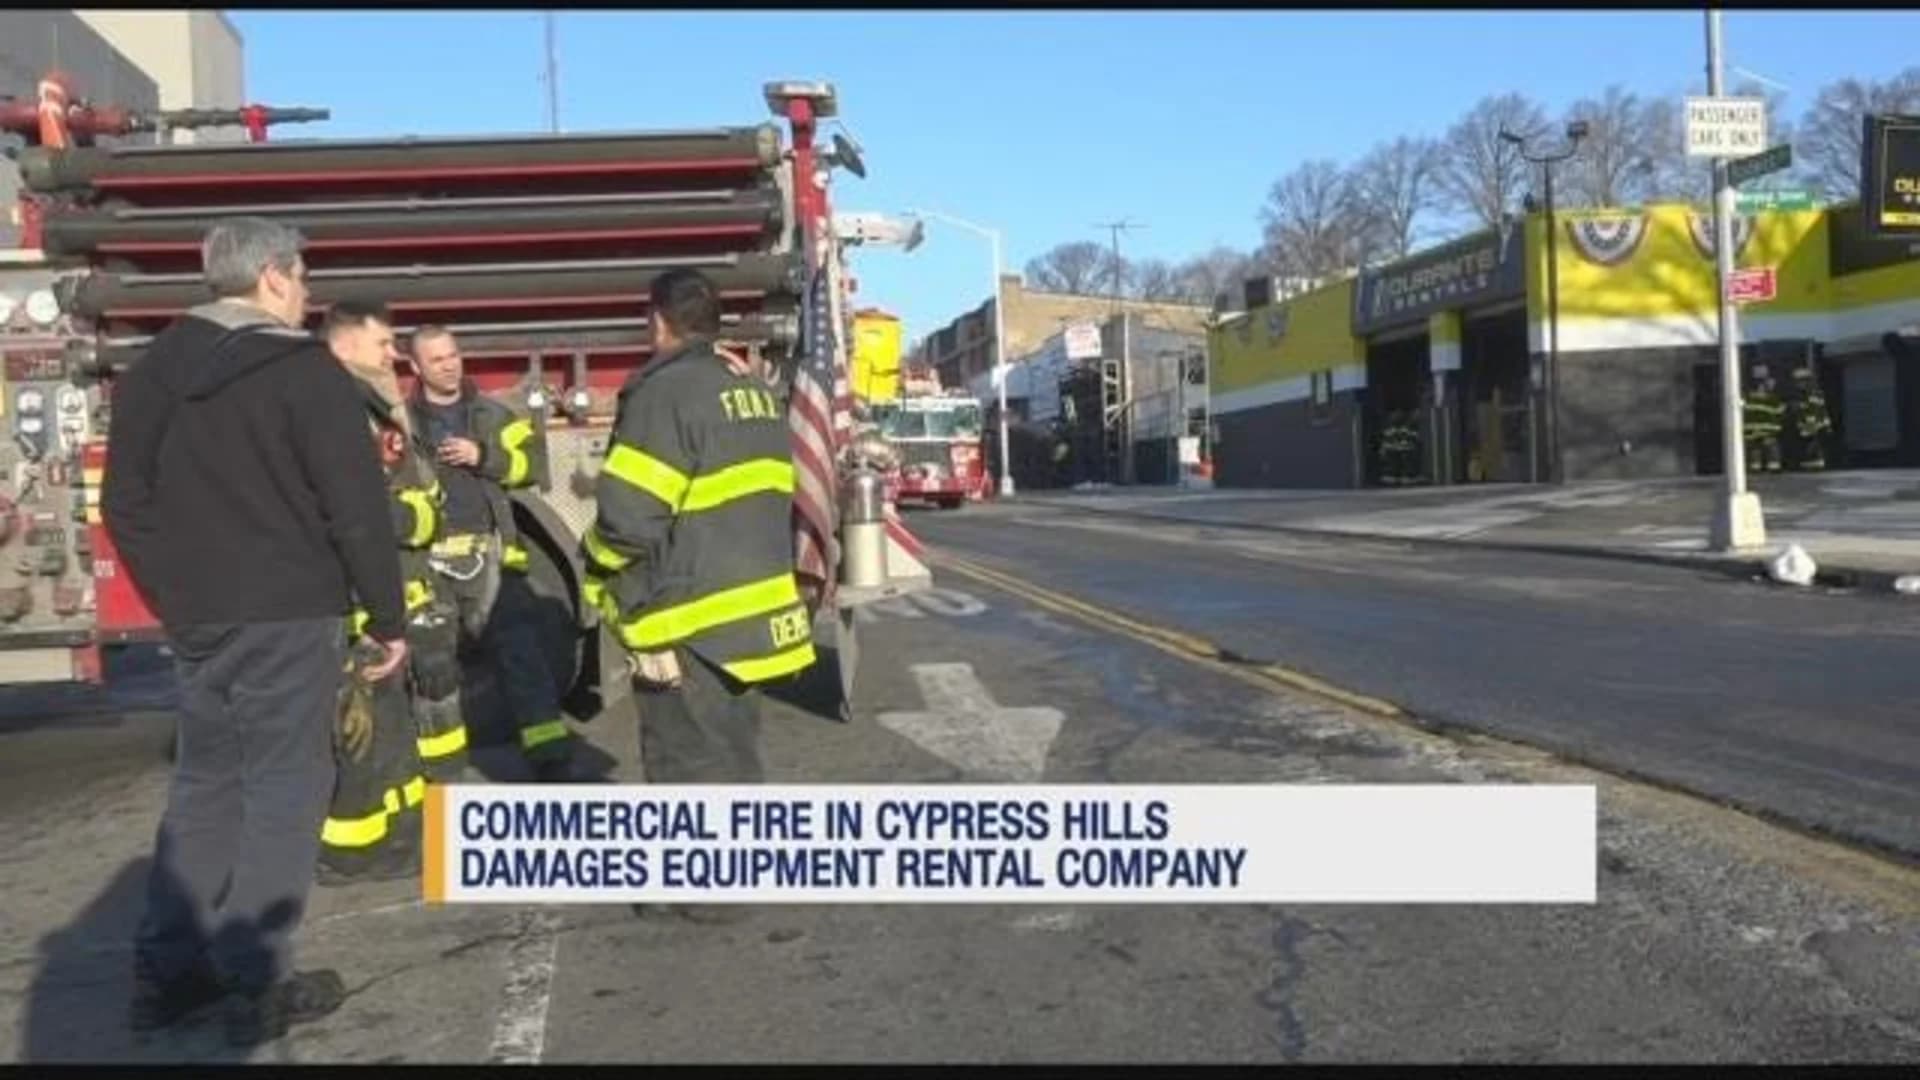 Crews battle fire in Cypress Hills commercial building